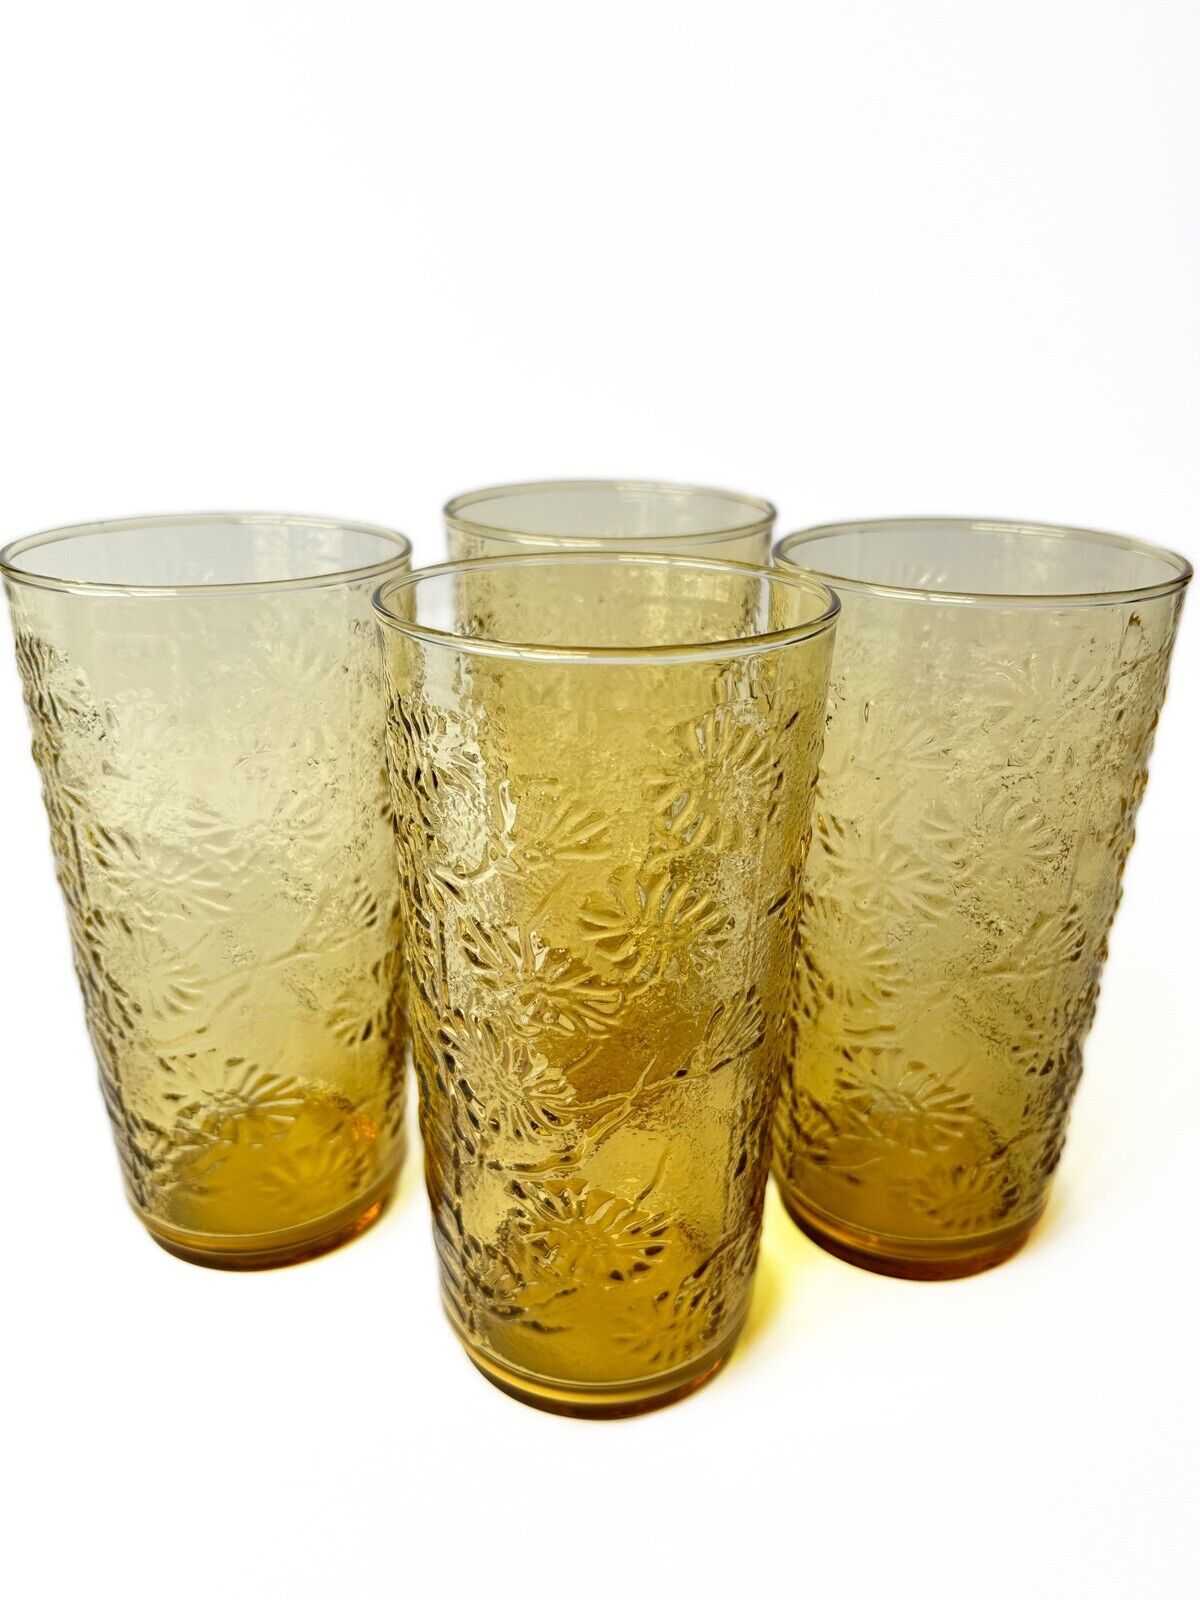 4 Vtg Anchor Hocking Spring Song Daisy Amber Tumblers 6.75 in TALL 24 Oz HTF